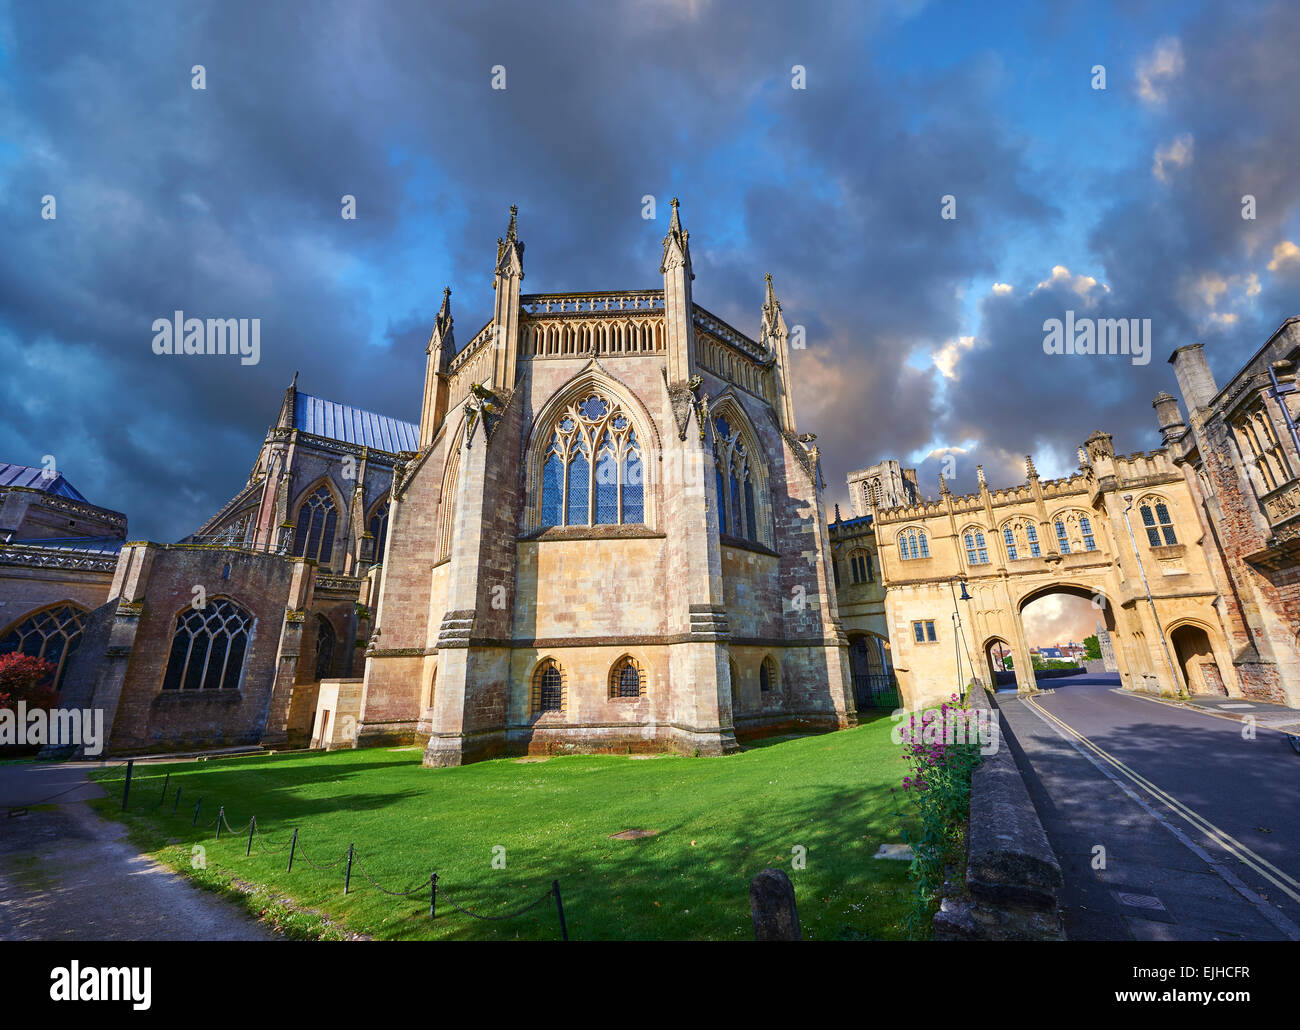 Chapter House of the the medieval Wells Cathedral built in the Early English Gothic style in 1175, Wells Somerset, England Stock Photo